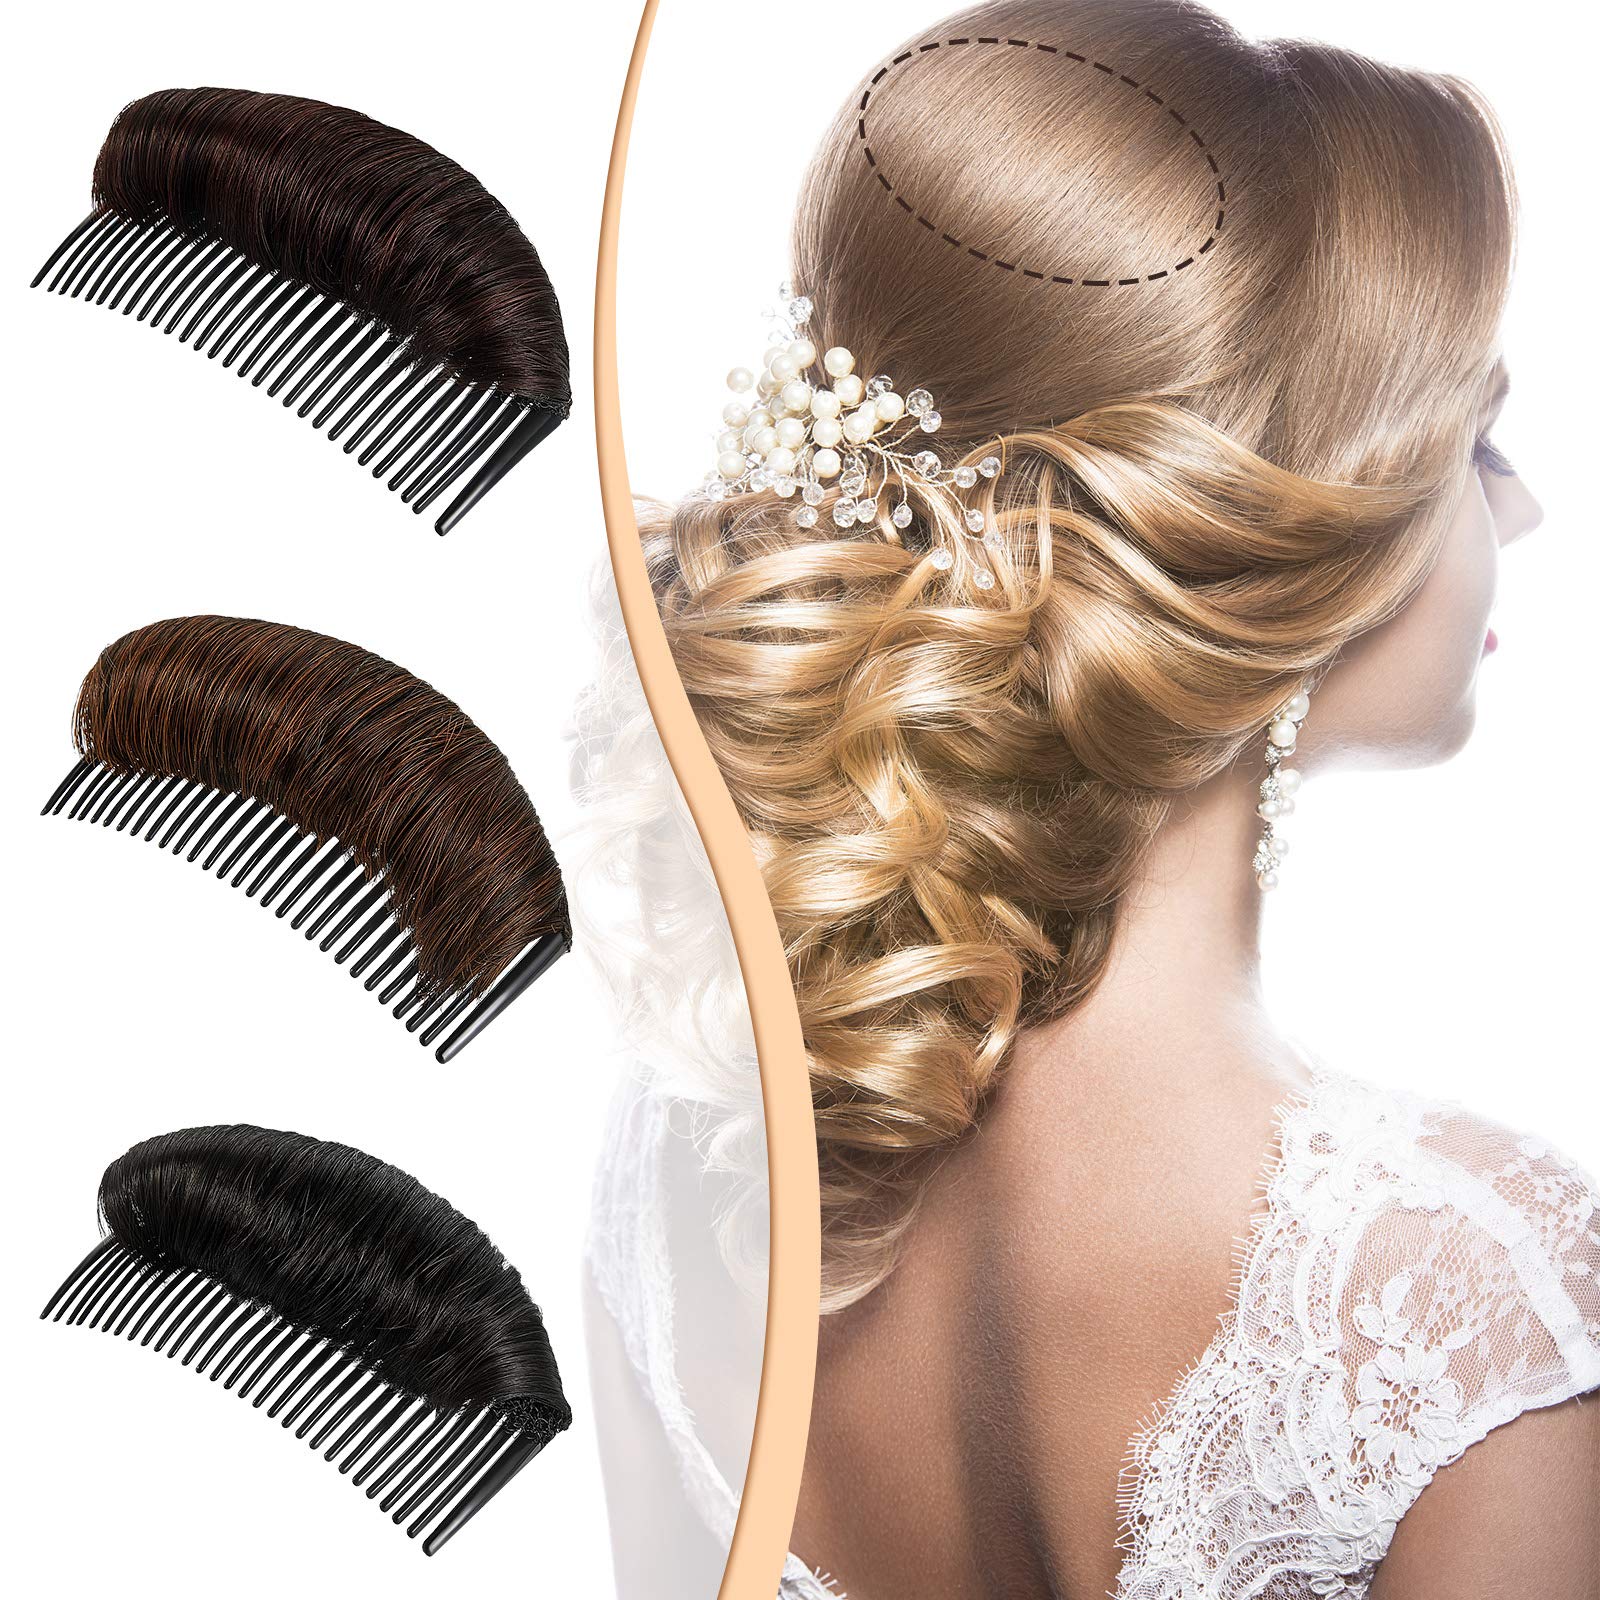 🔥HOT SALE - Invisible Fluffy Hair Pad